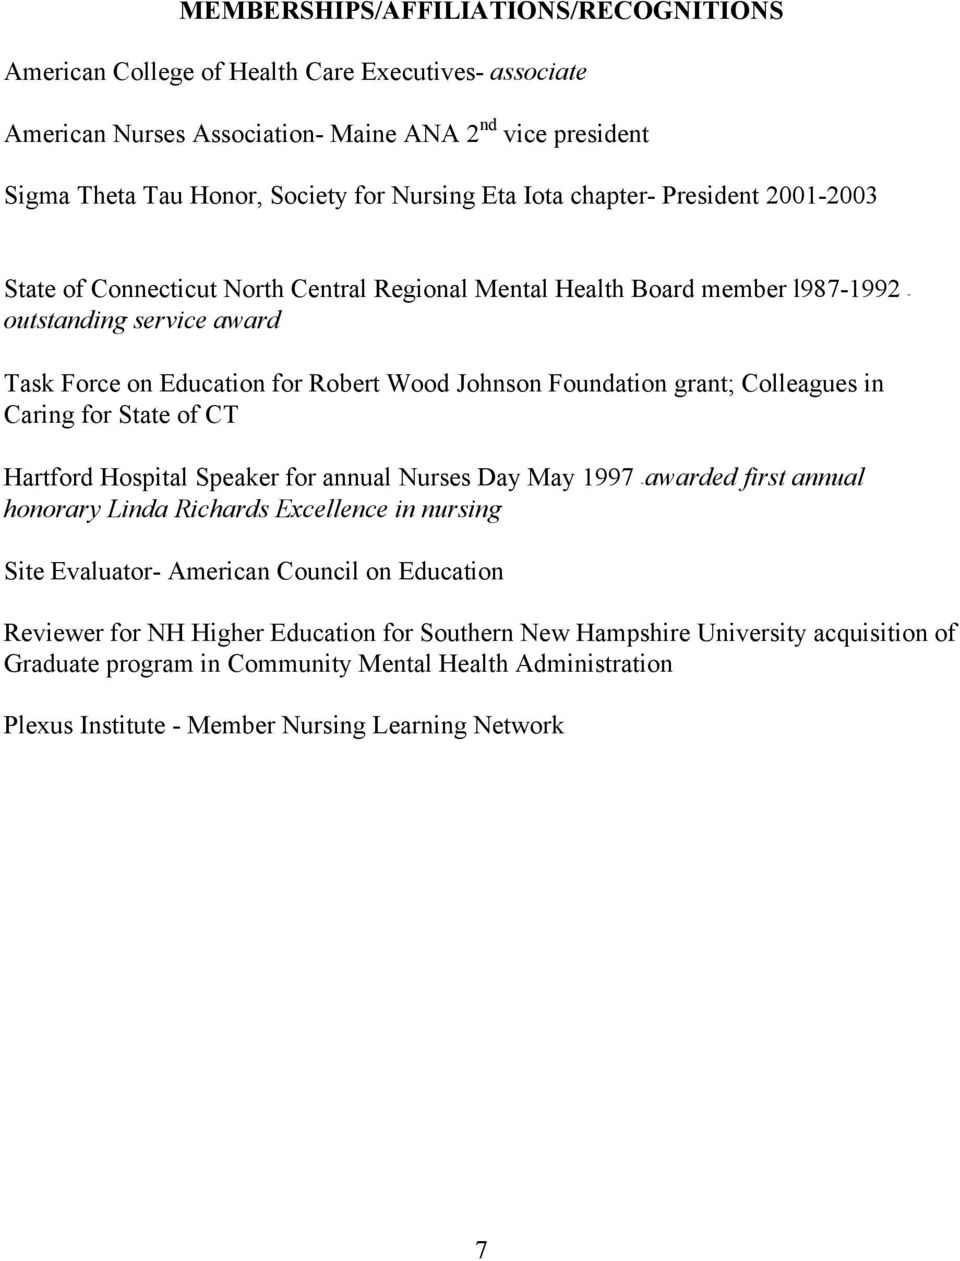 Foundation grant; Colleagues in Caring for State of CT Hartford Hospital Speaker for annual Nurses Day May 1997 - awarded first annual honorary Linda Richards Excellence in nursing Site Evaluator-